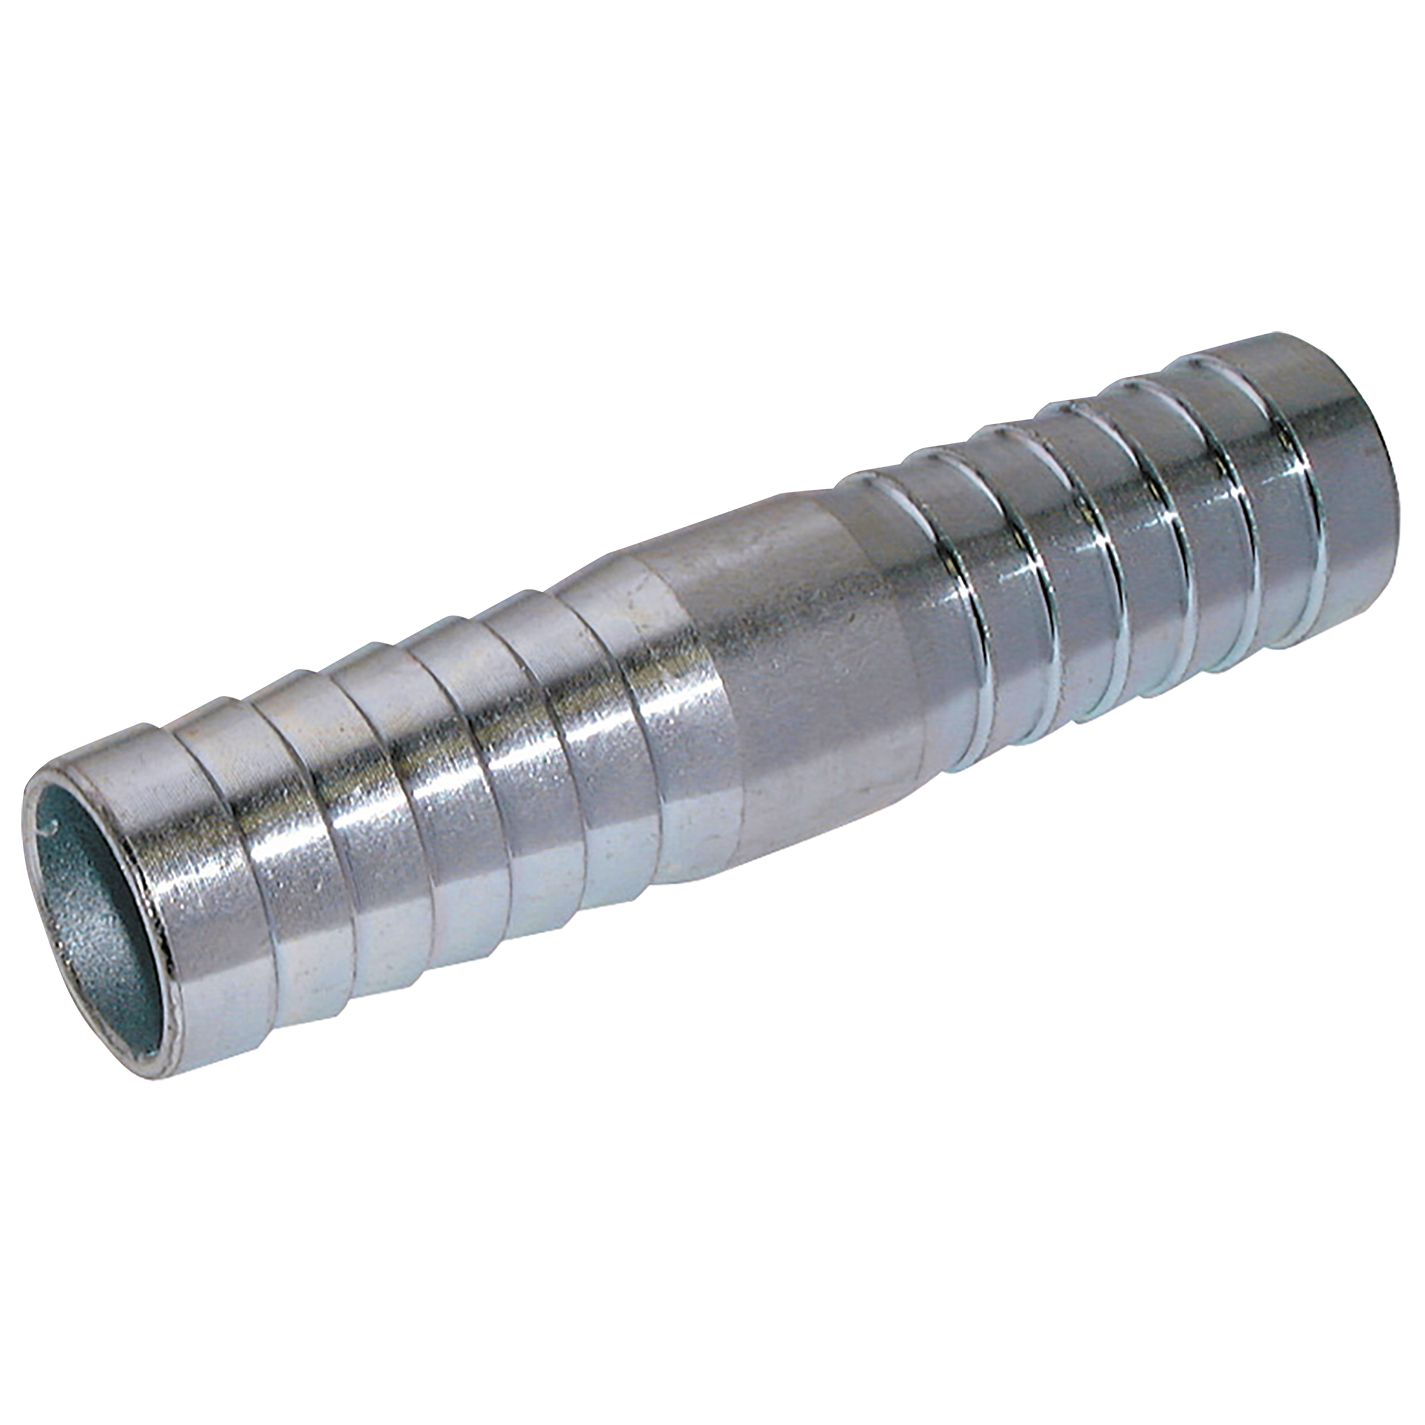 1.1/4"ID HOSE STAINLESS STEEL JOINER